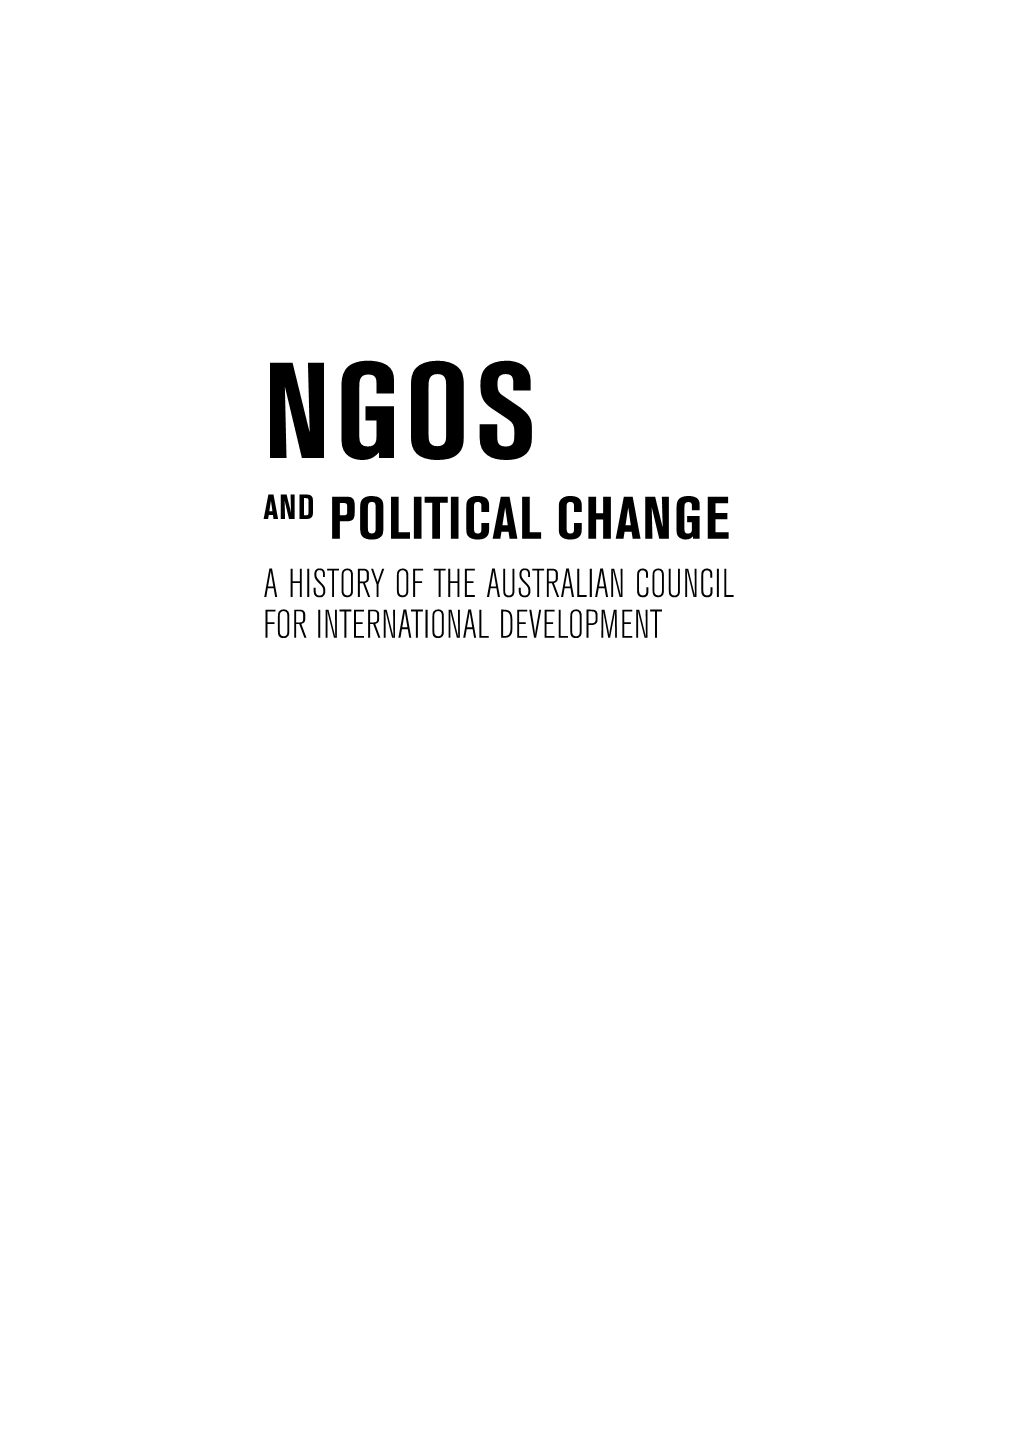 Ngos and Political Change: a History of the Australian